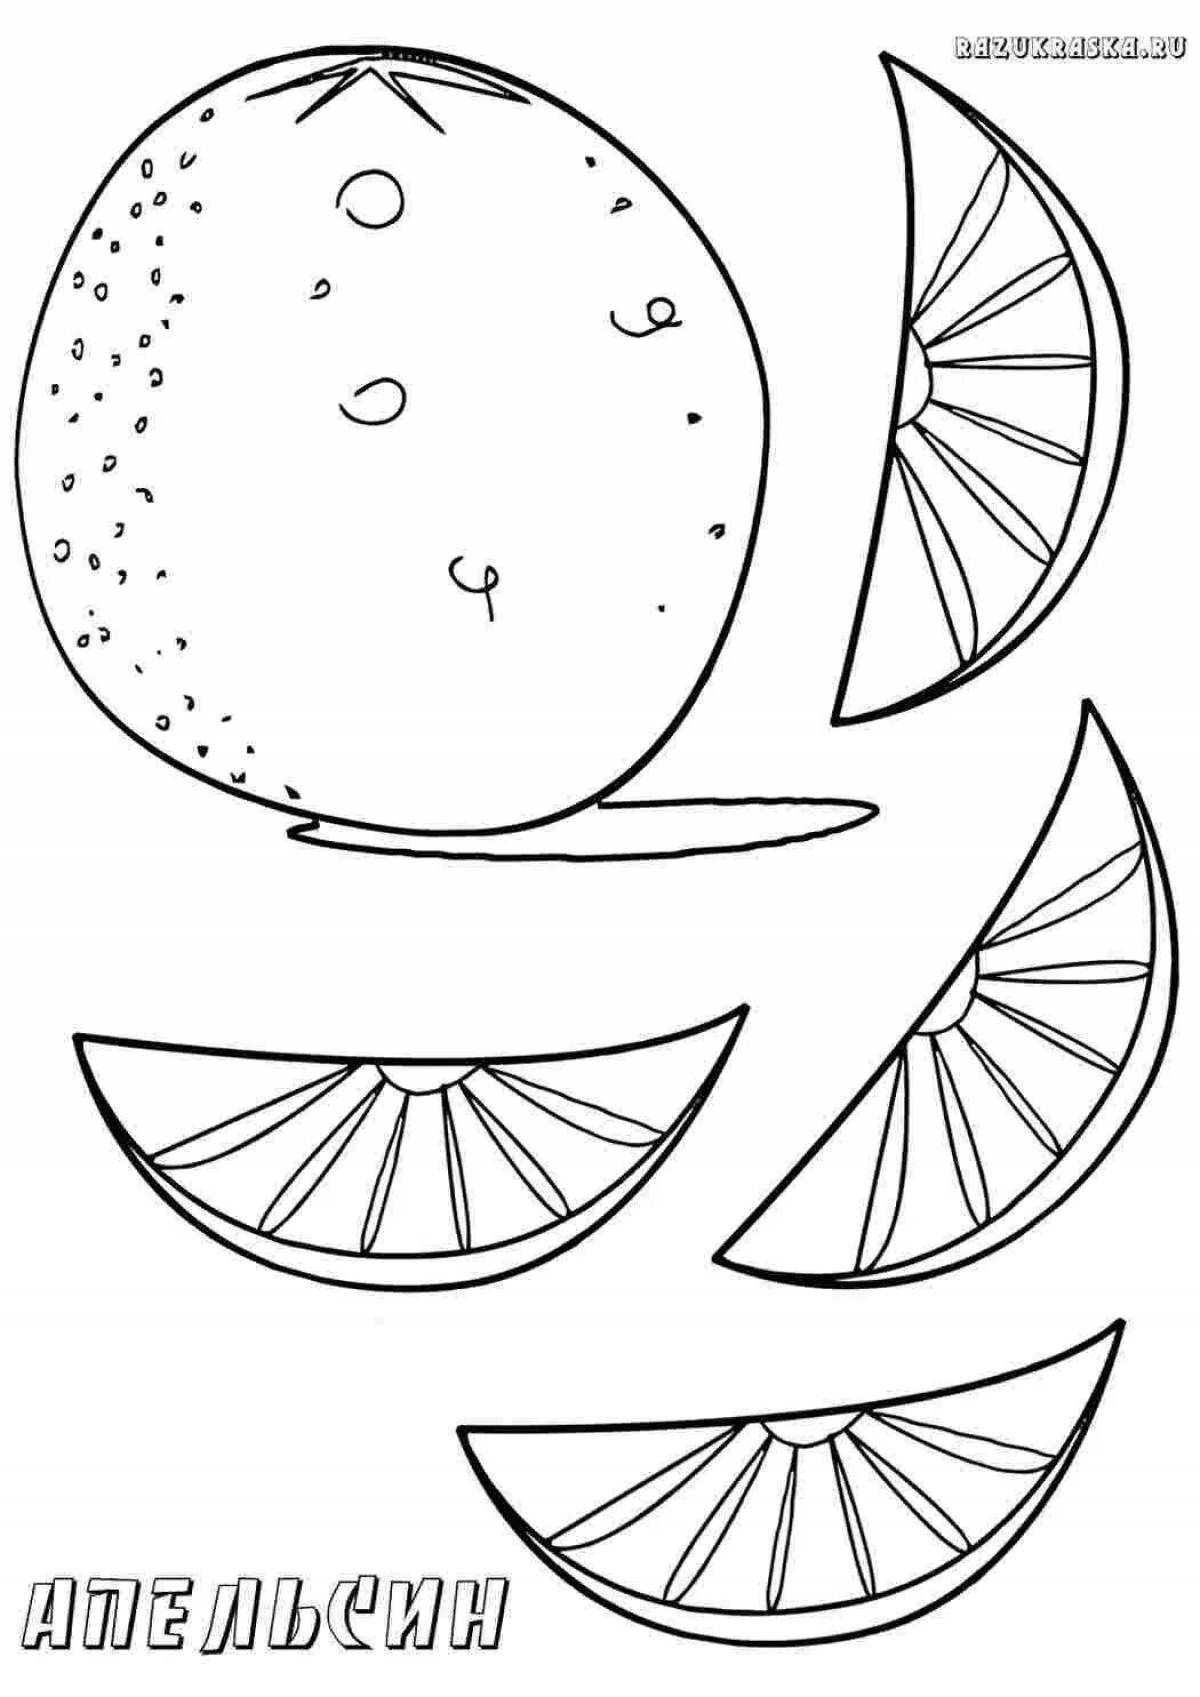 Glowing orange slices coloring page